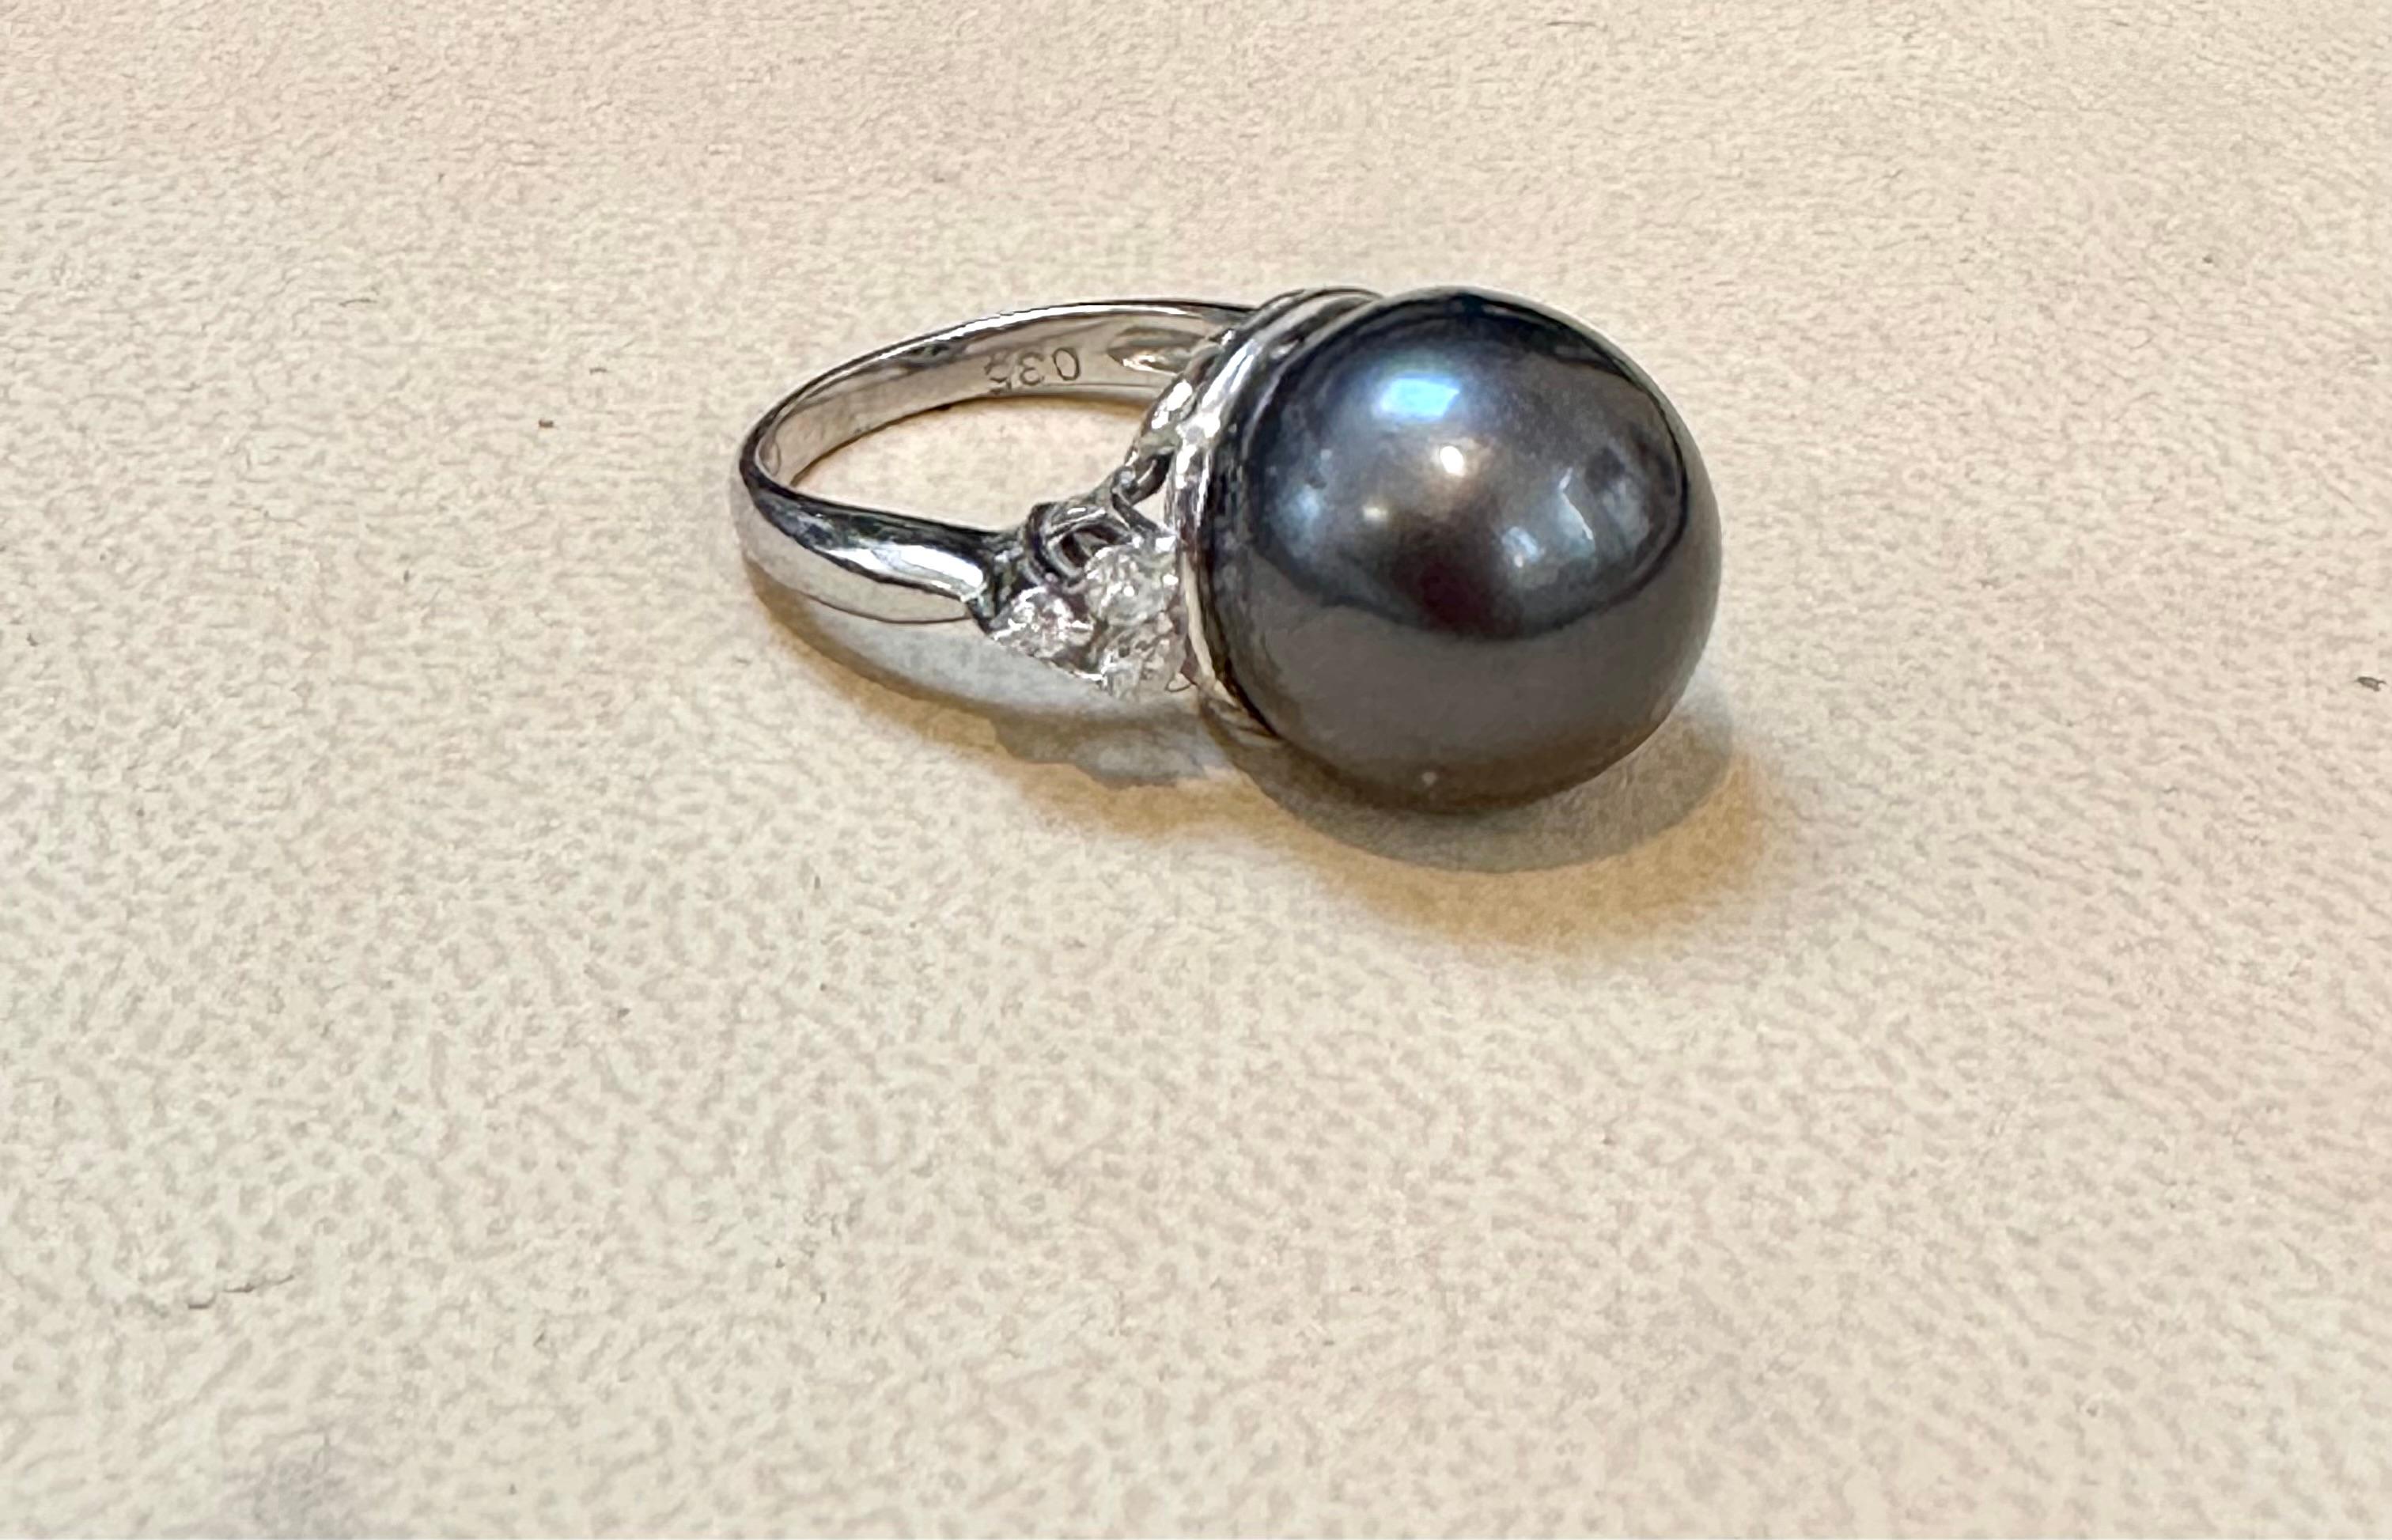 Introducing the exquisite 15mm Round Black Tahitian Pearl & Diamond Platinum Ring, a symbol of timeless elegance. This captivating cocktail ring is meticulously crafted from platinum and features a stunning 15mm Tahitian pearl as its centerpiece.